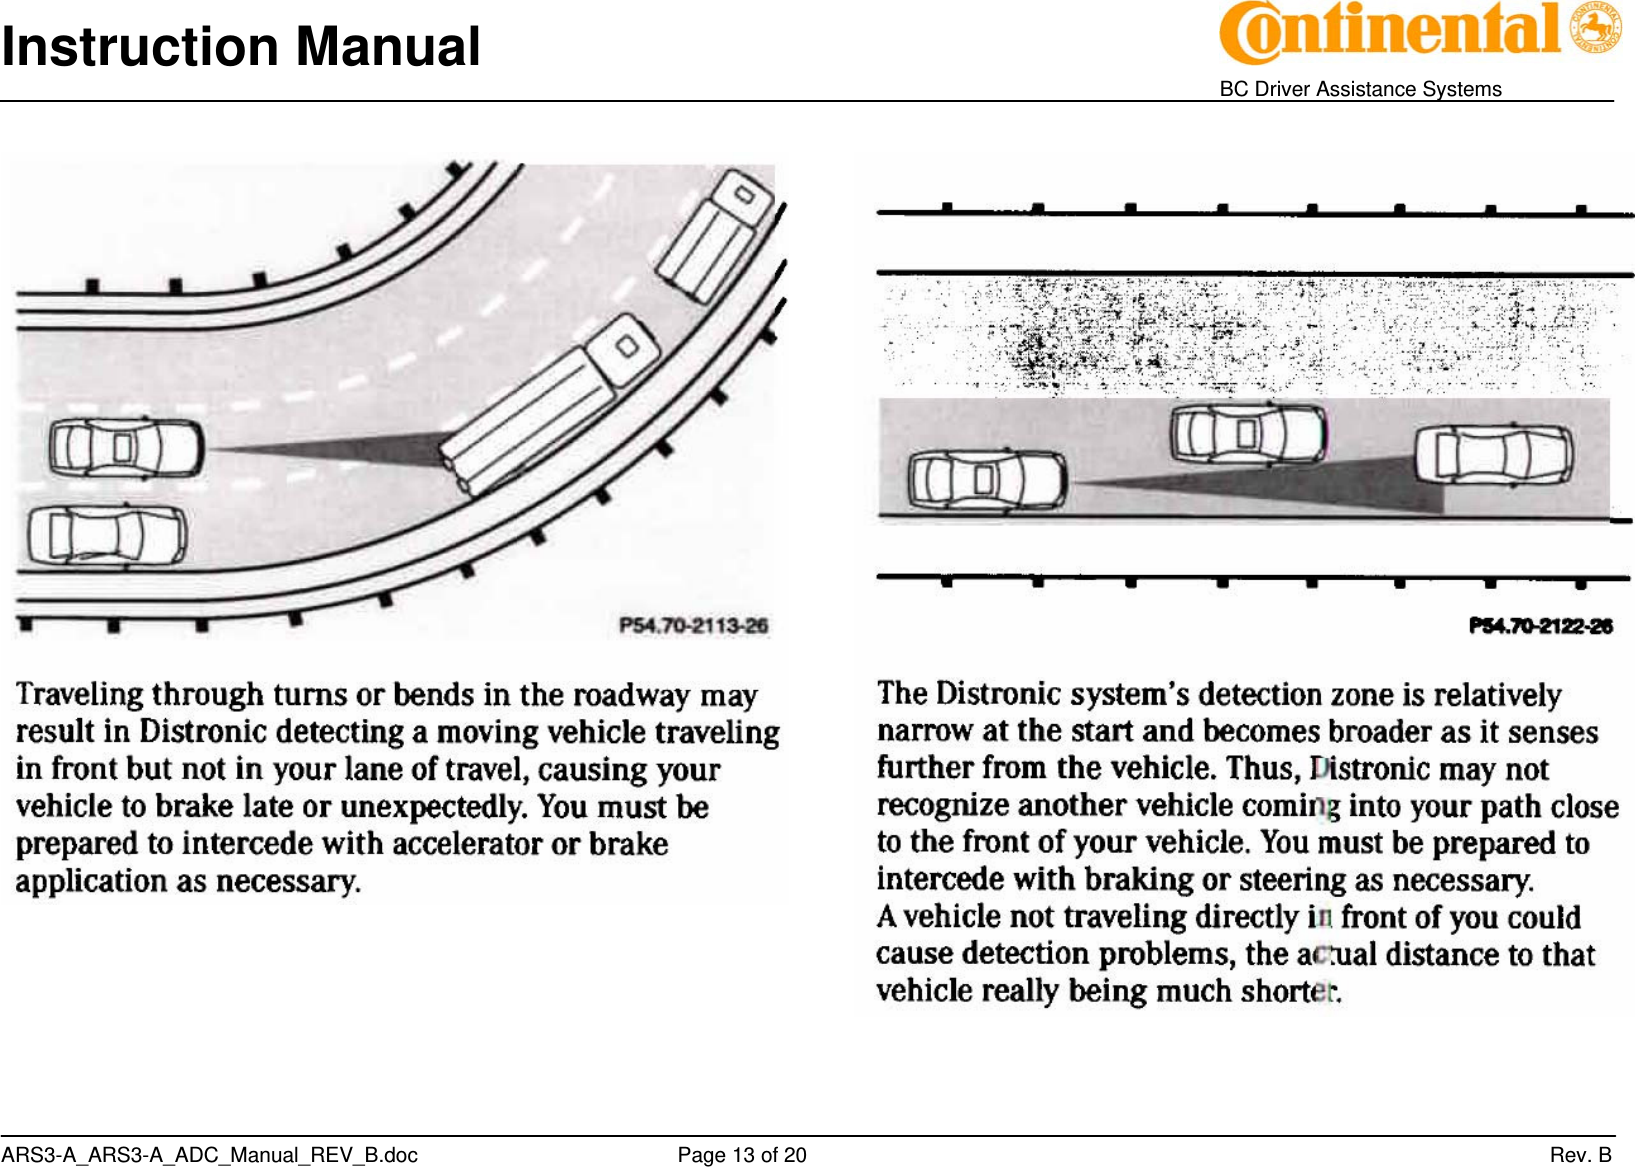 Instruction Manual    BC Driver Assistance Systems ARS3-A_ARS3-A_ADC_Manual_REV_B.doc     Page 13 of 20                 Rev. B   